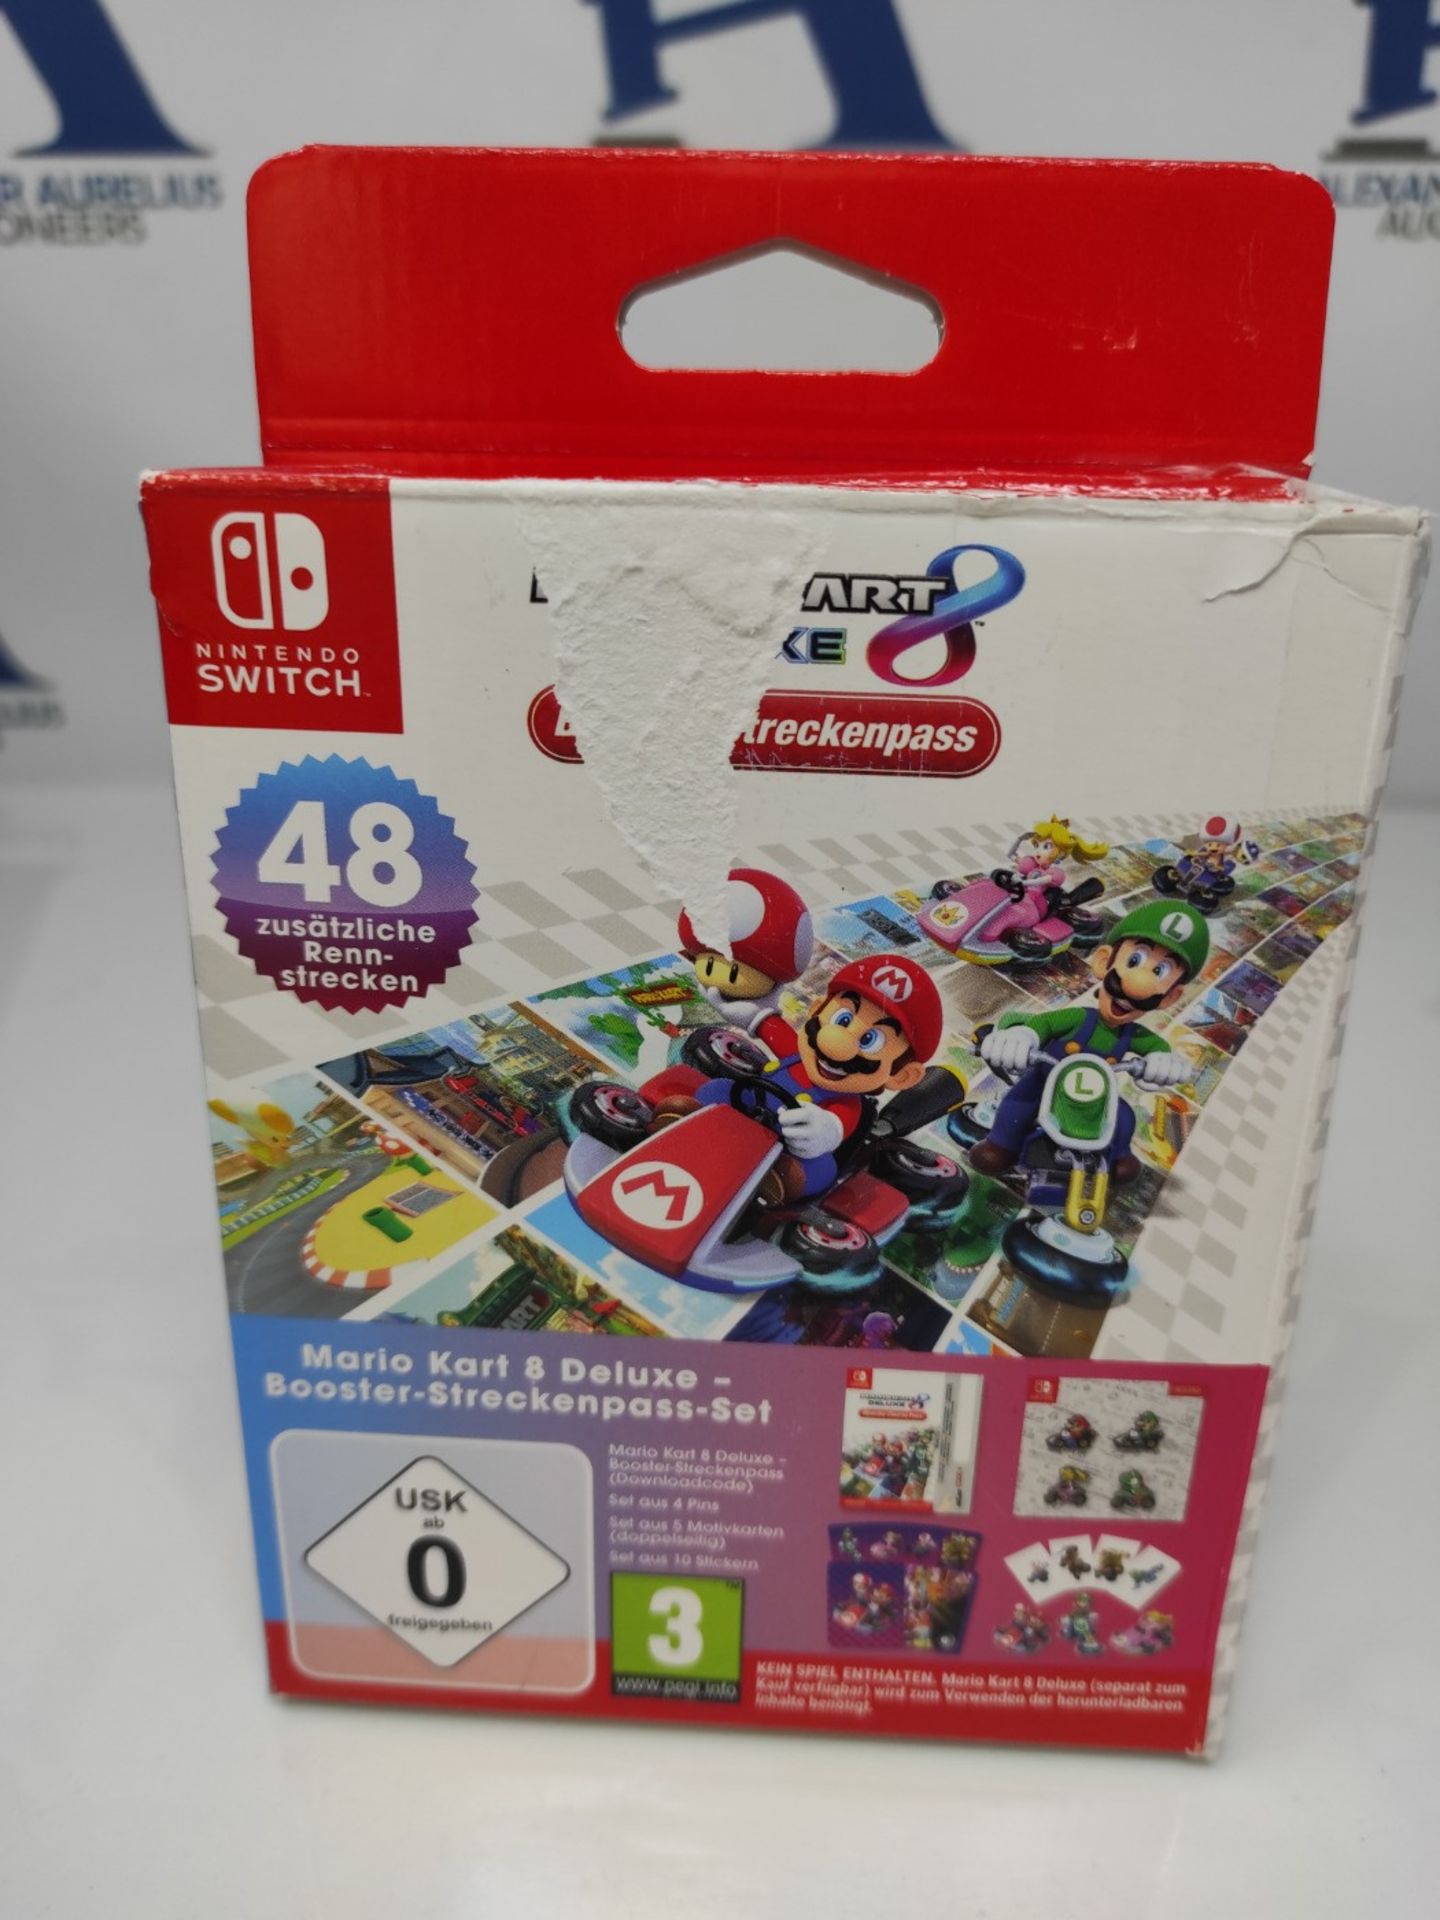 Mario Kart 8 Deluxe Booster Track Pass Set - [Nintendo Switch] - Image 2 of 3